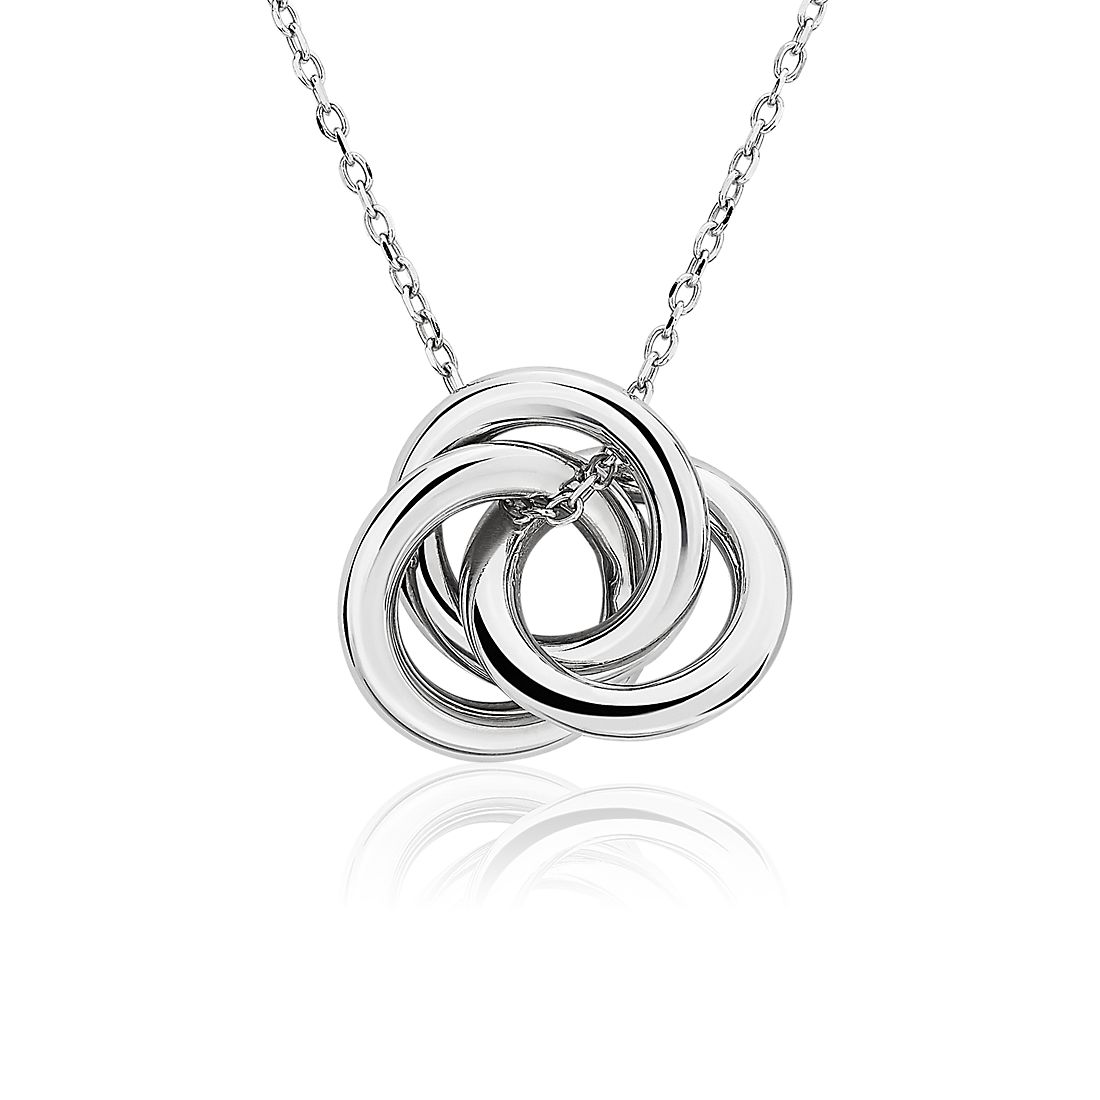 Love knot necklace